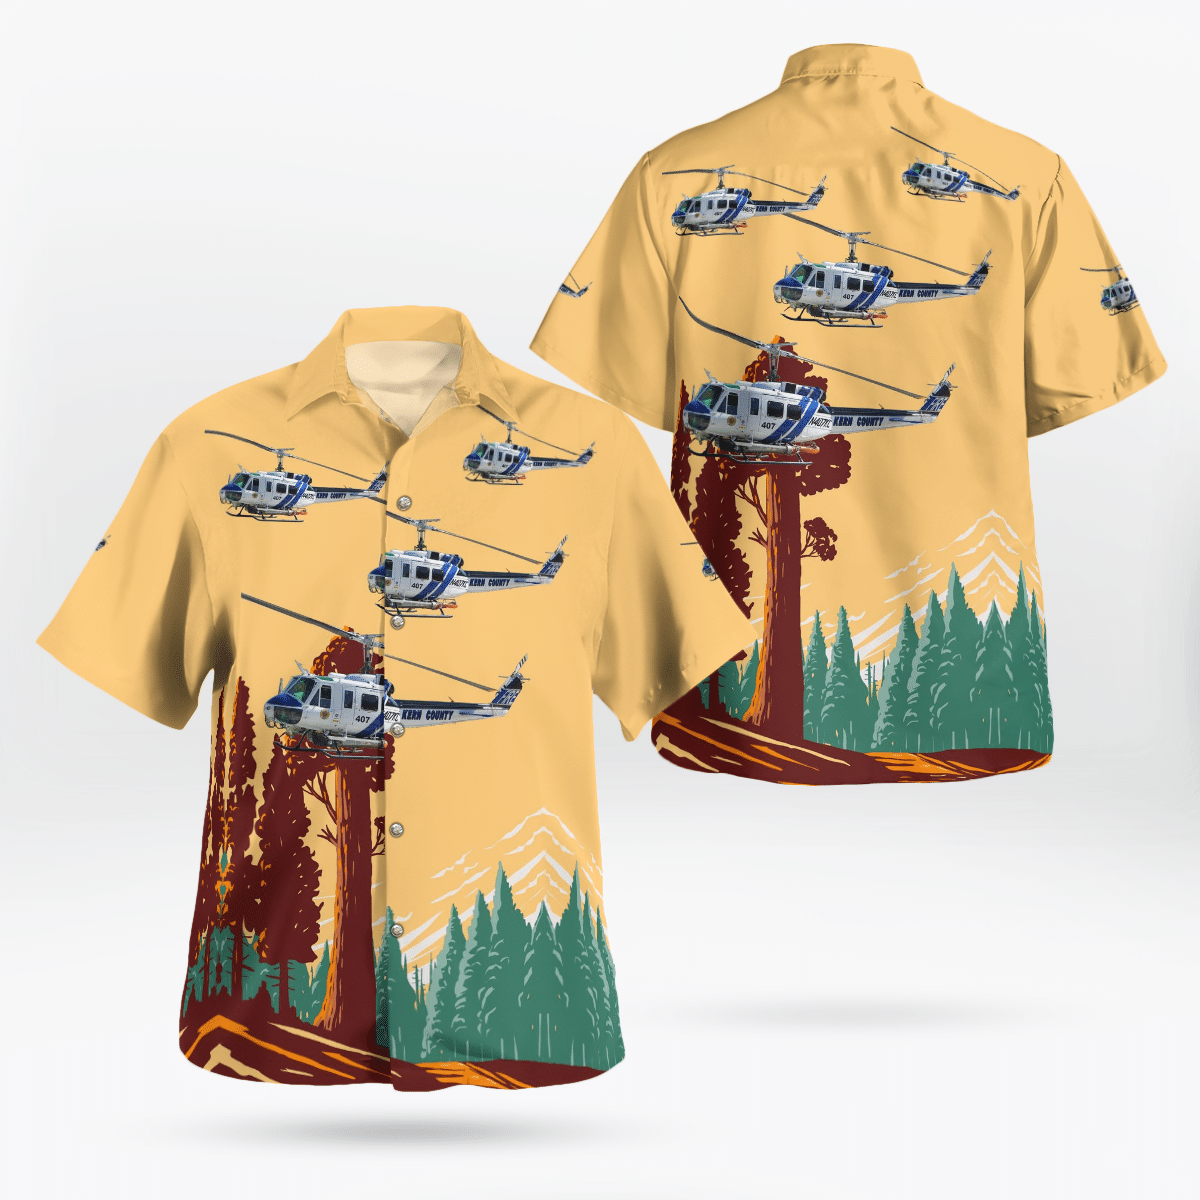 Some cool 3d hawaii shirt for this summer 4